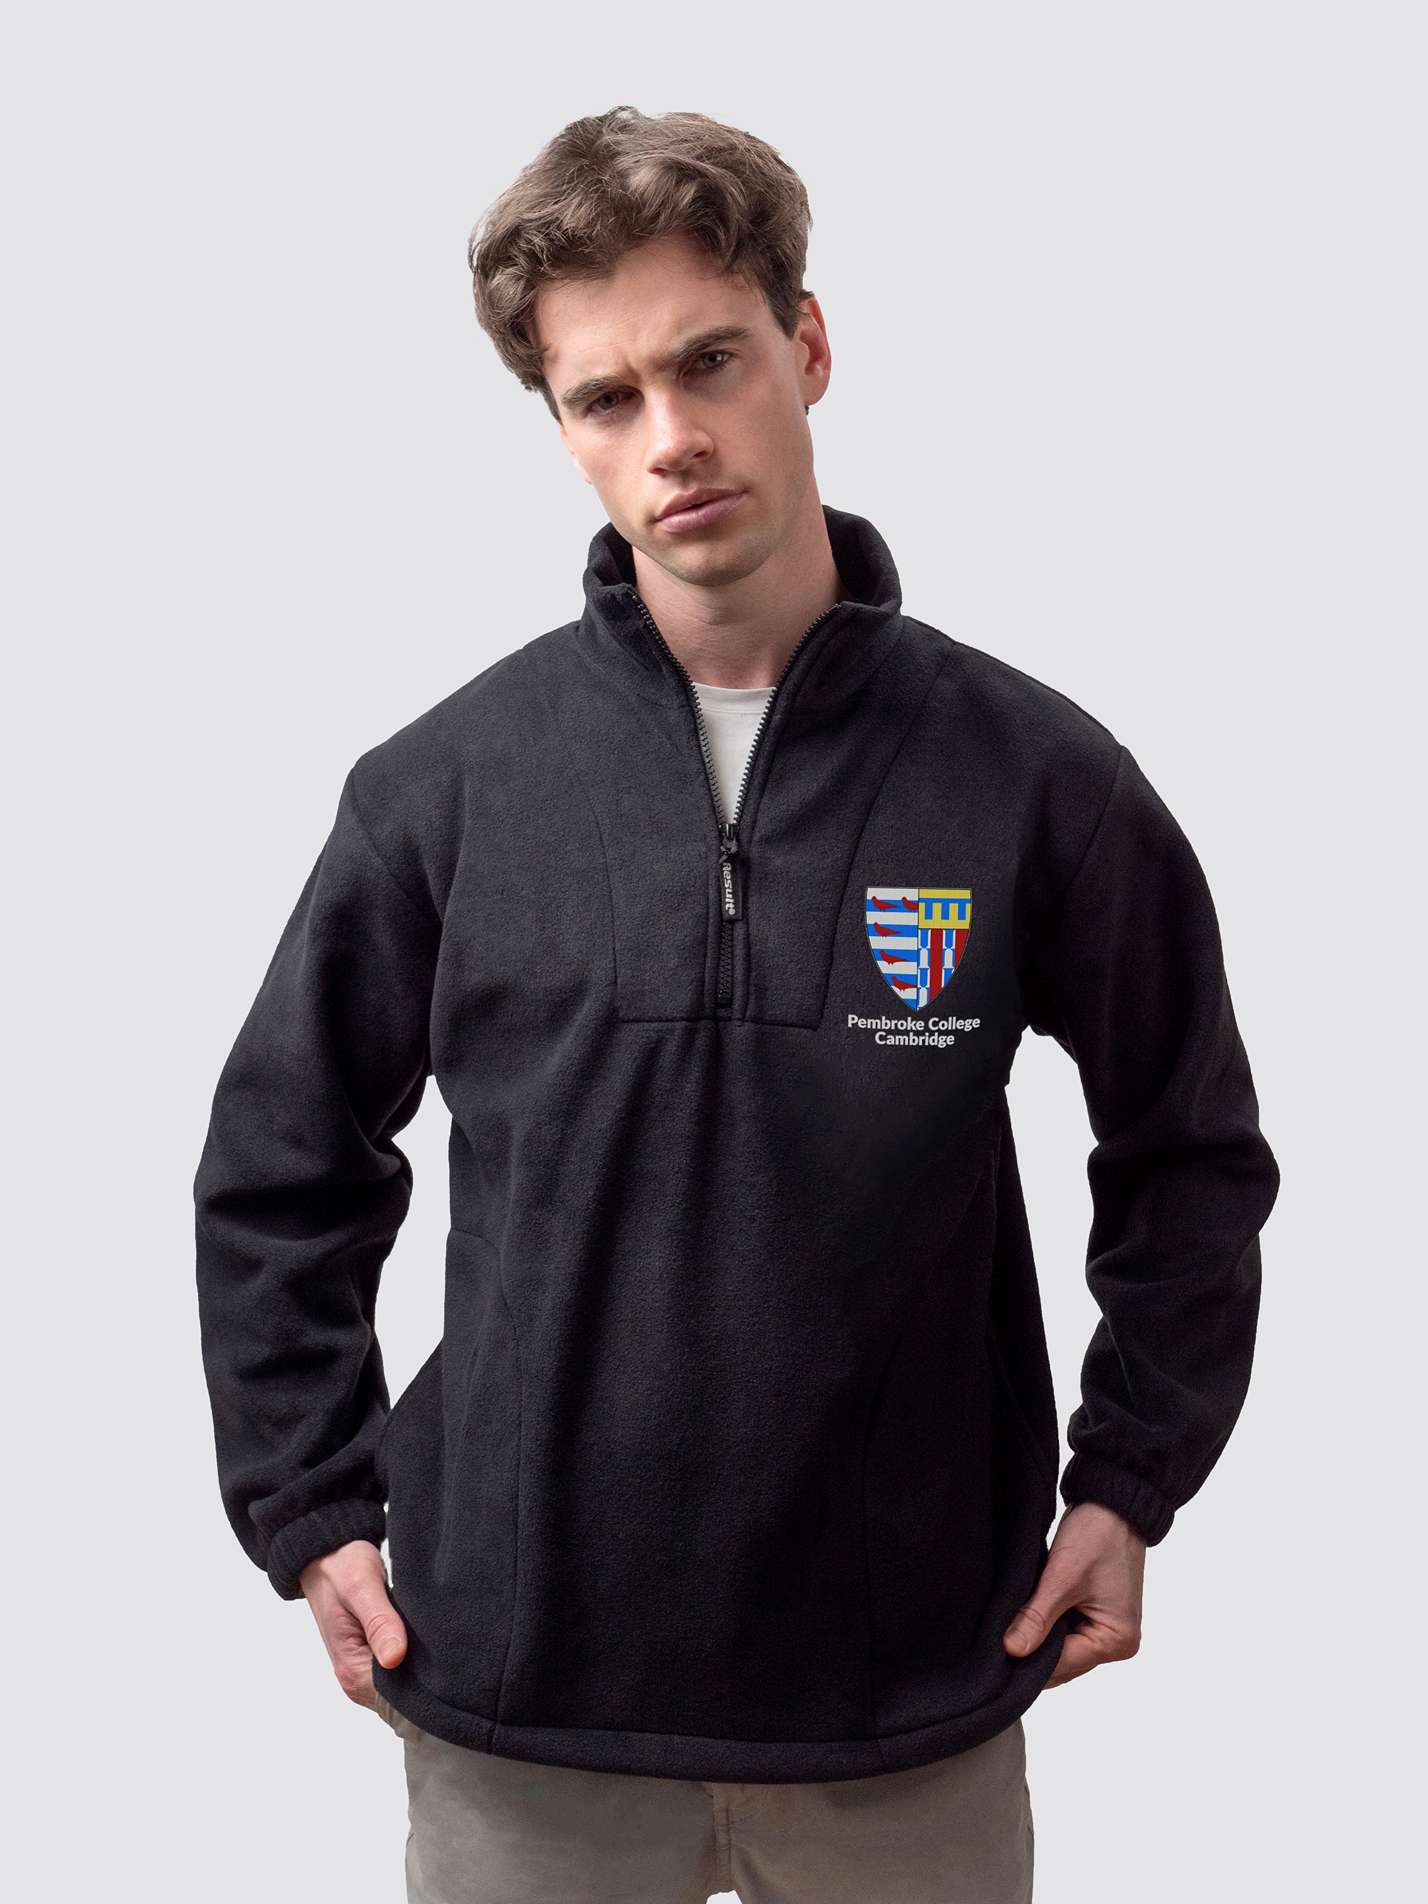 Cambridge University fleece, with custom embroidered initials and Pembroke crest